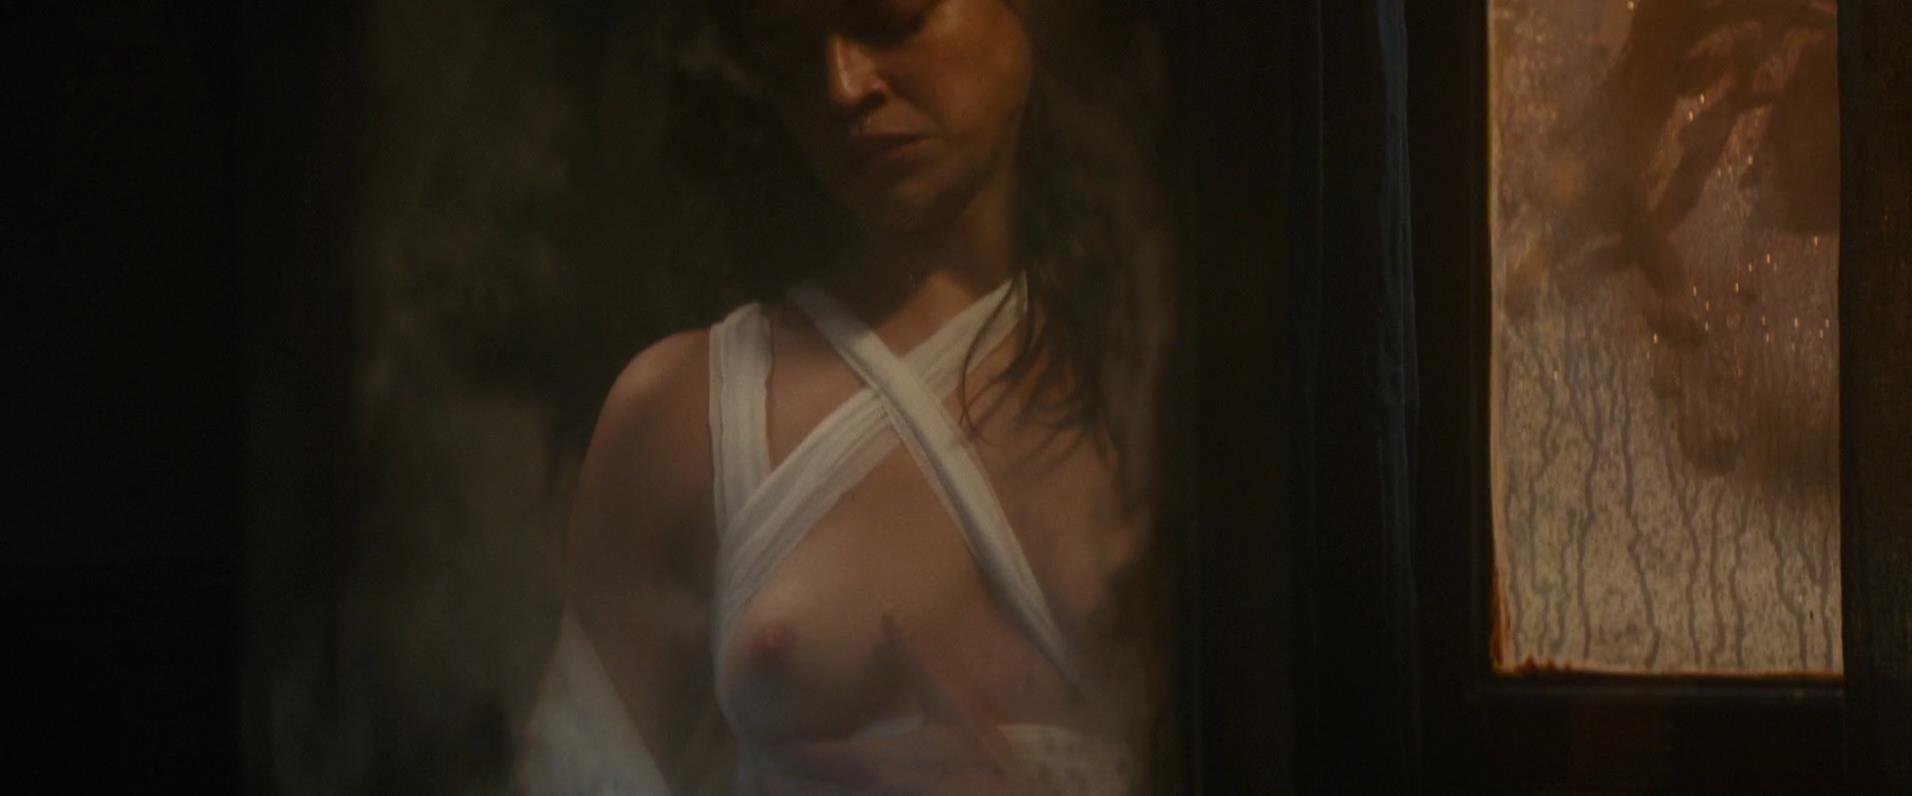 Michelle rodriguez sexy pictures